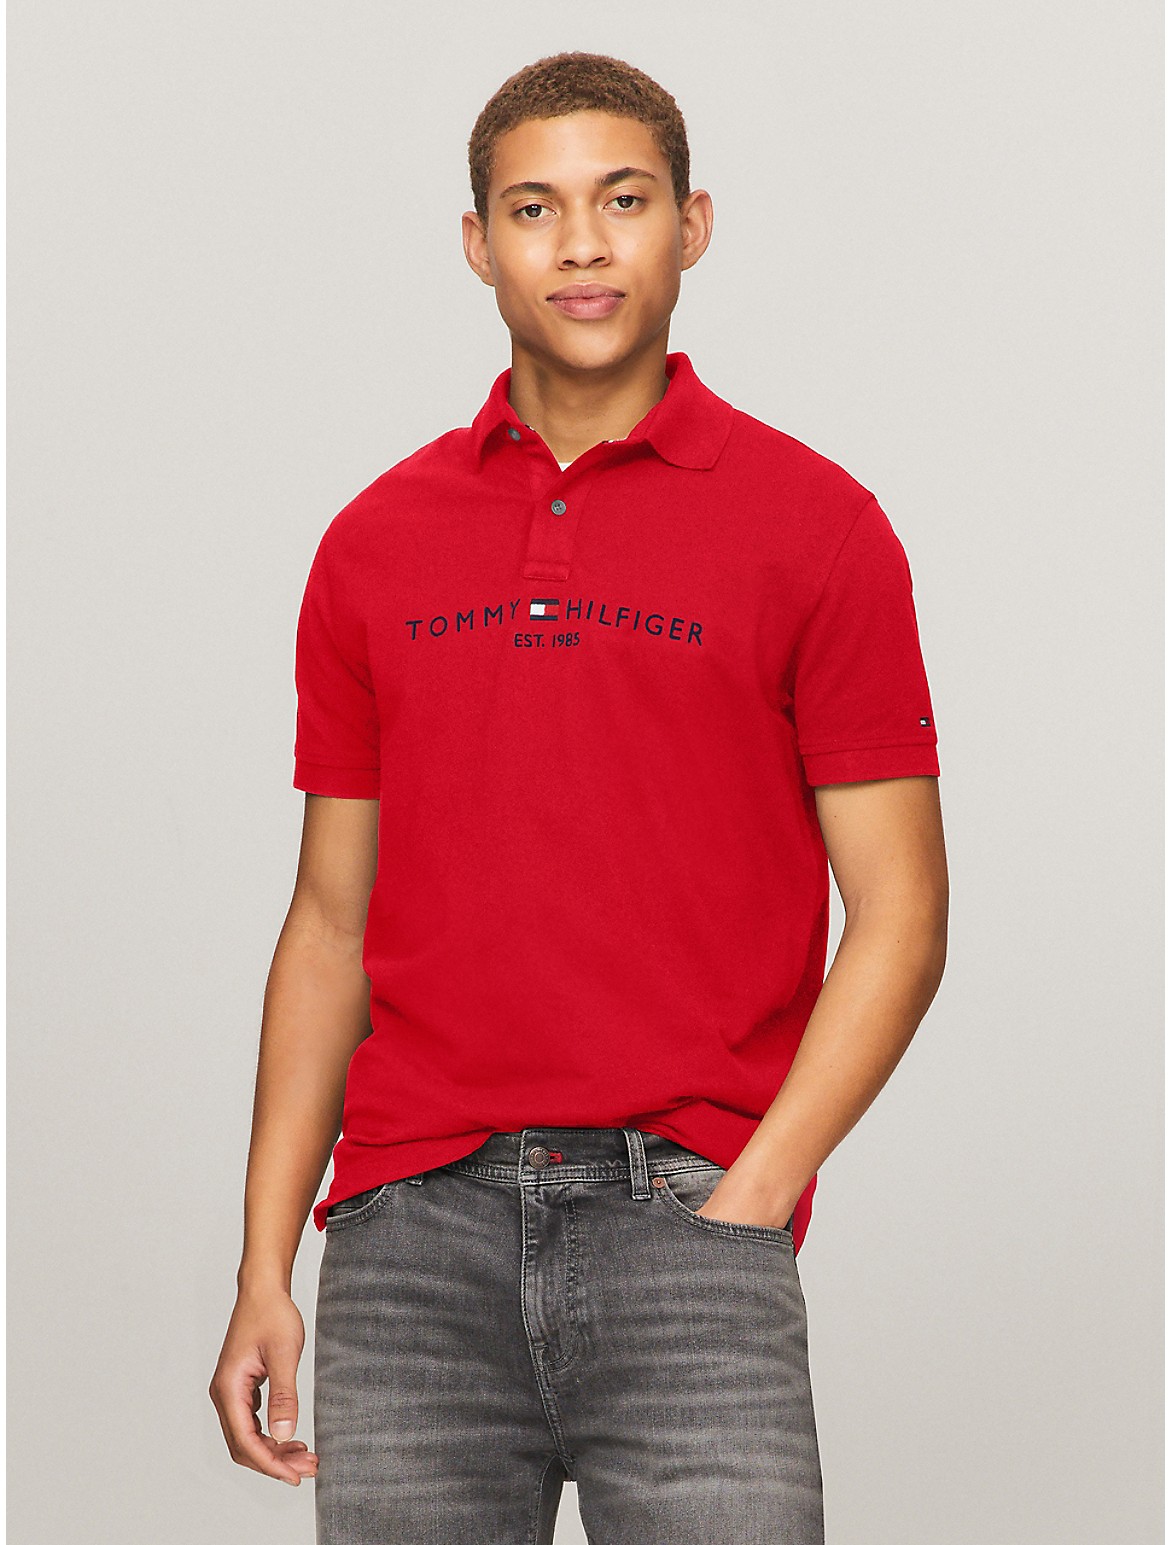 Tommy Hilfiger Men's Regular Fit Embroidered Tommy Graphic Polo - Red - M